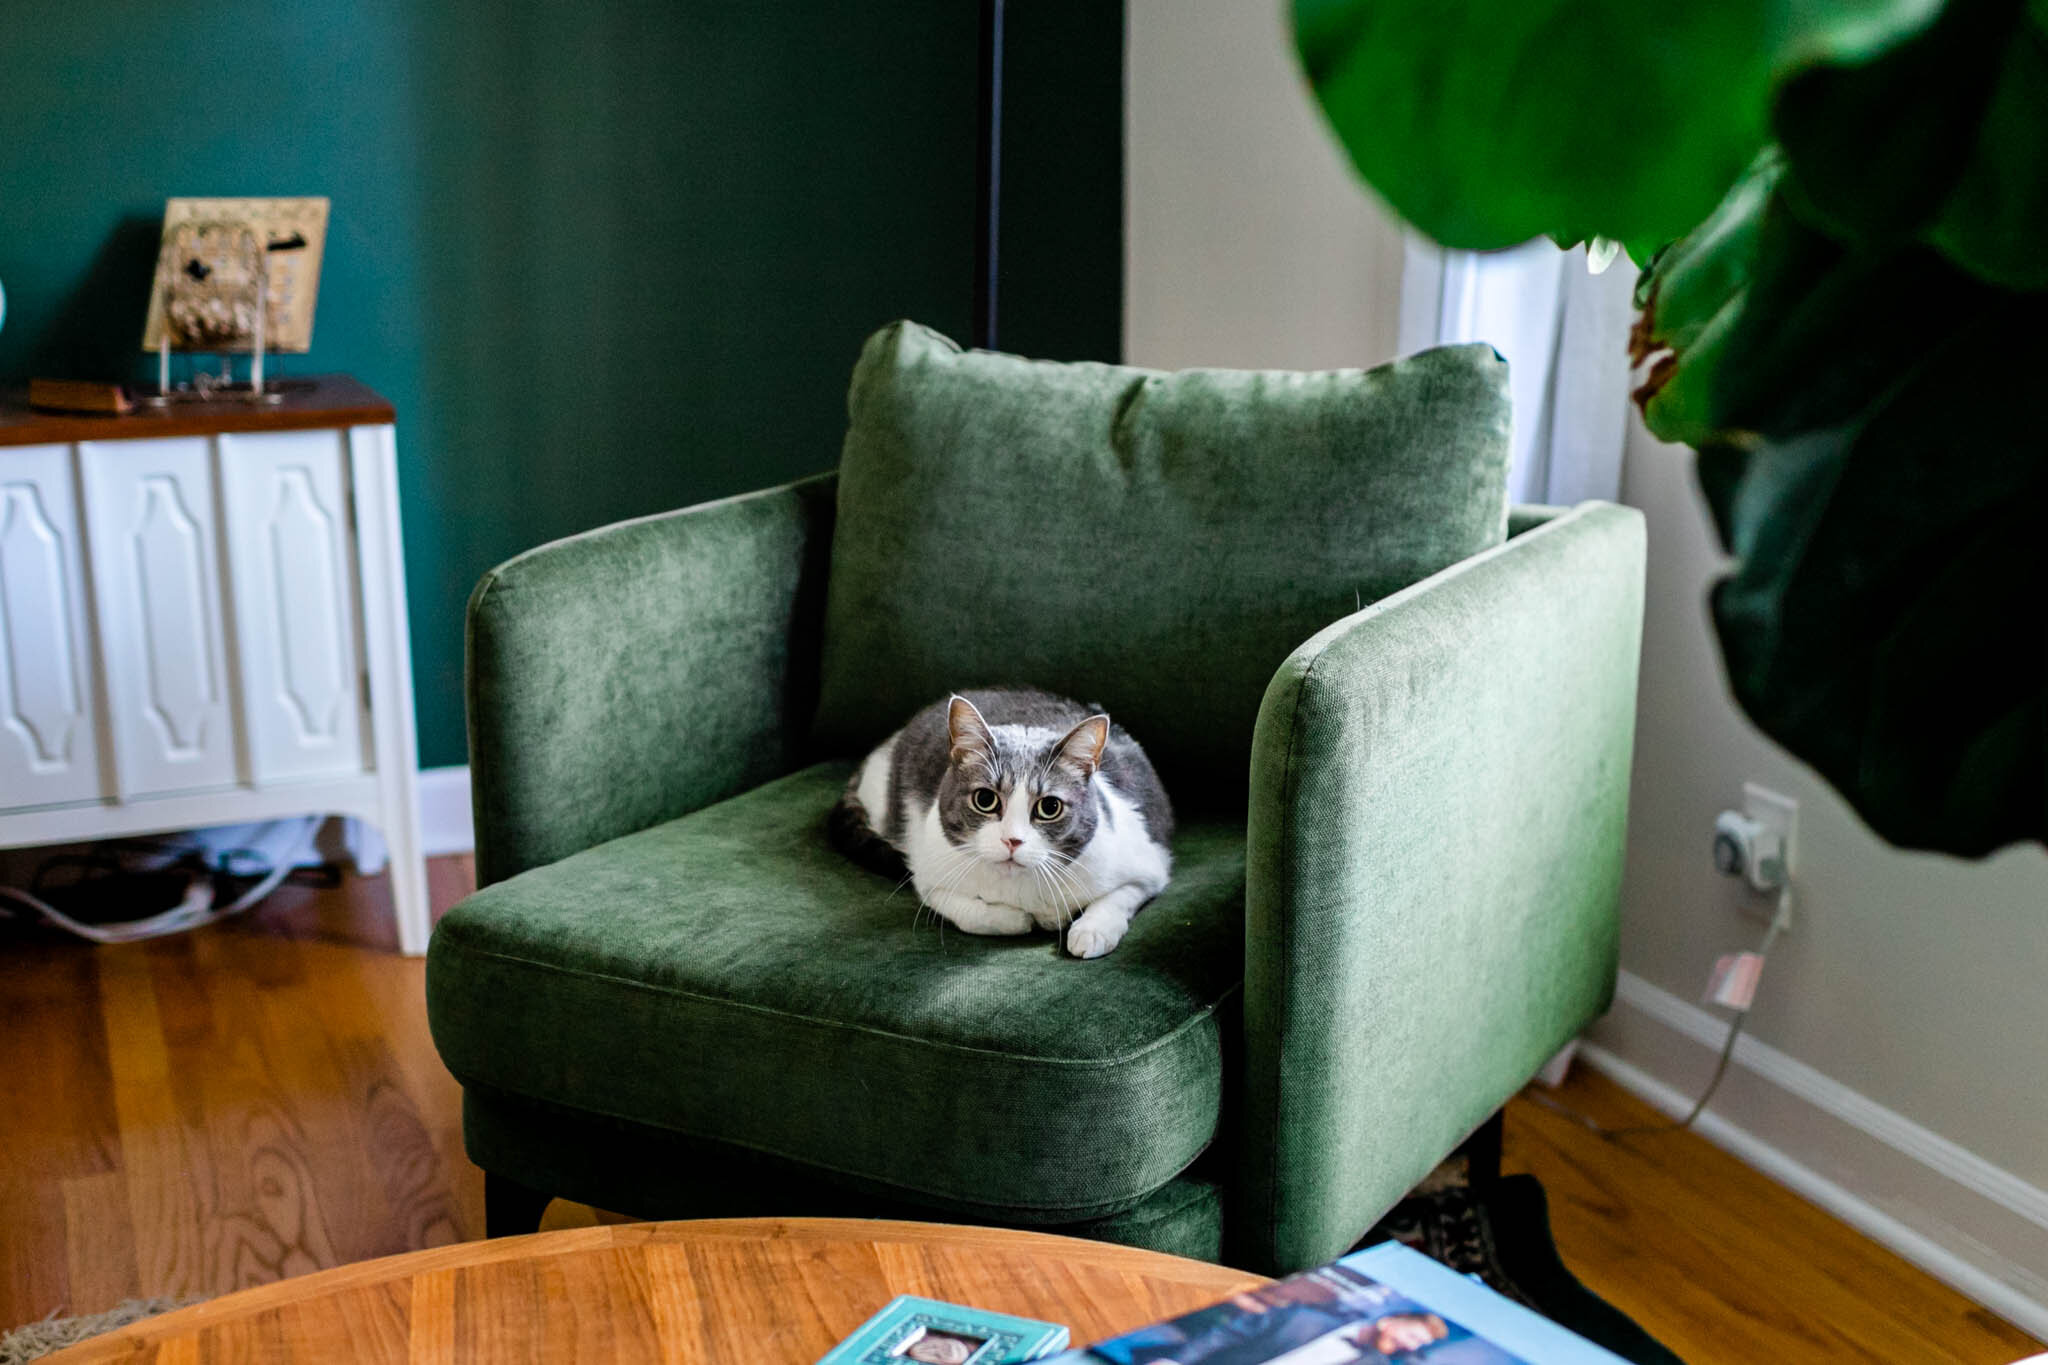 Durham Newborn Photographer | By G. Lin Photography | Cat sitting on couch